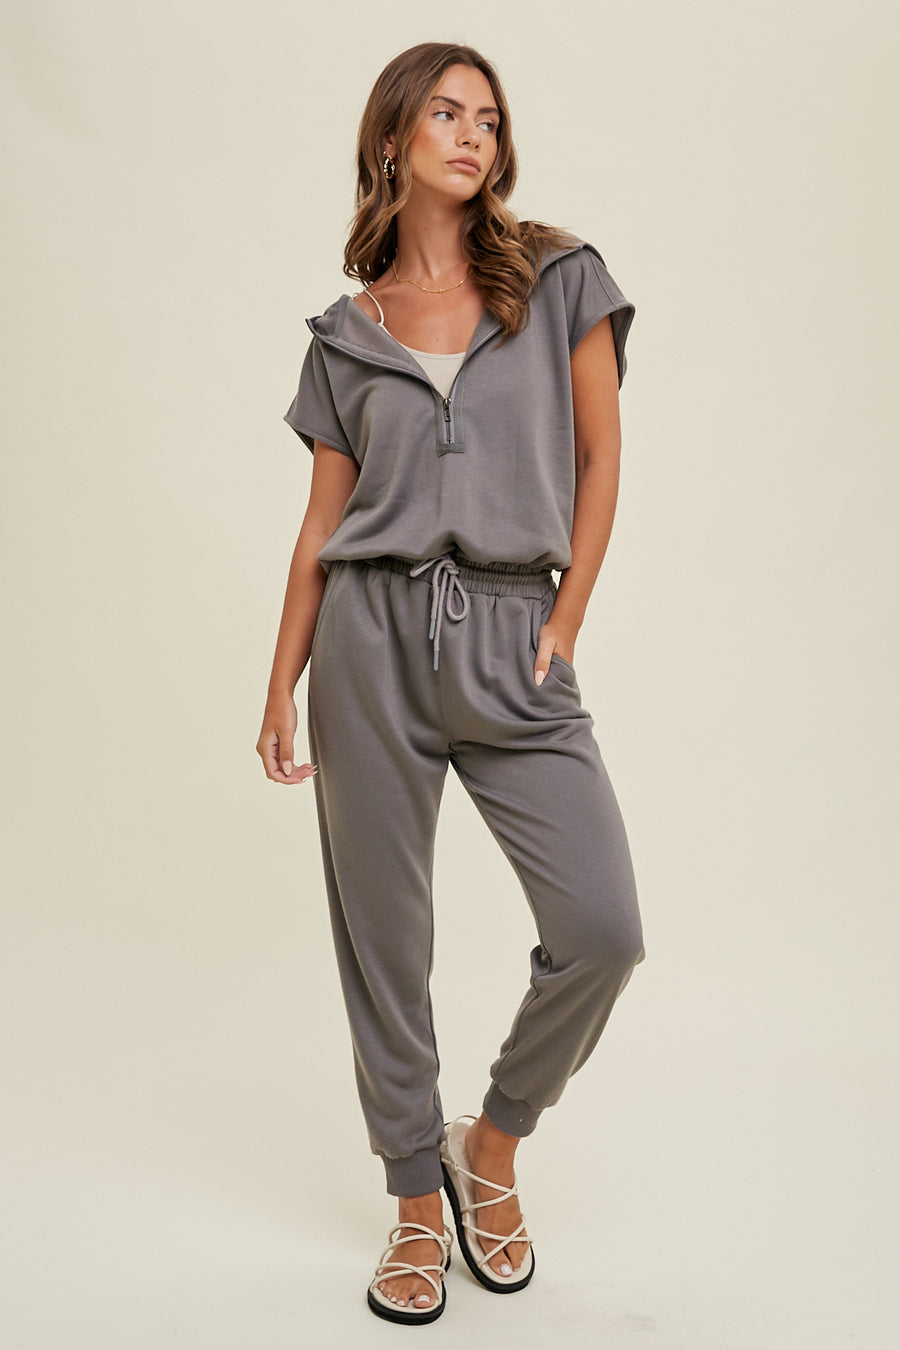 Never Wanna Leave Charcoal Jumpsuit